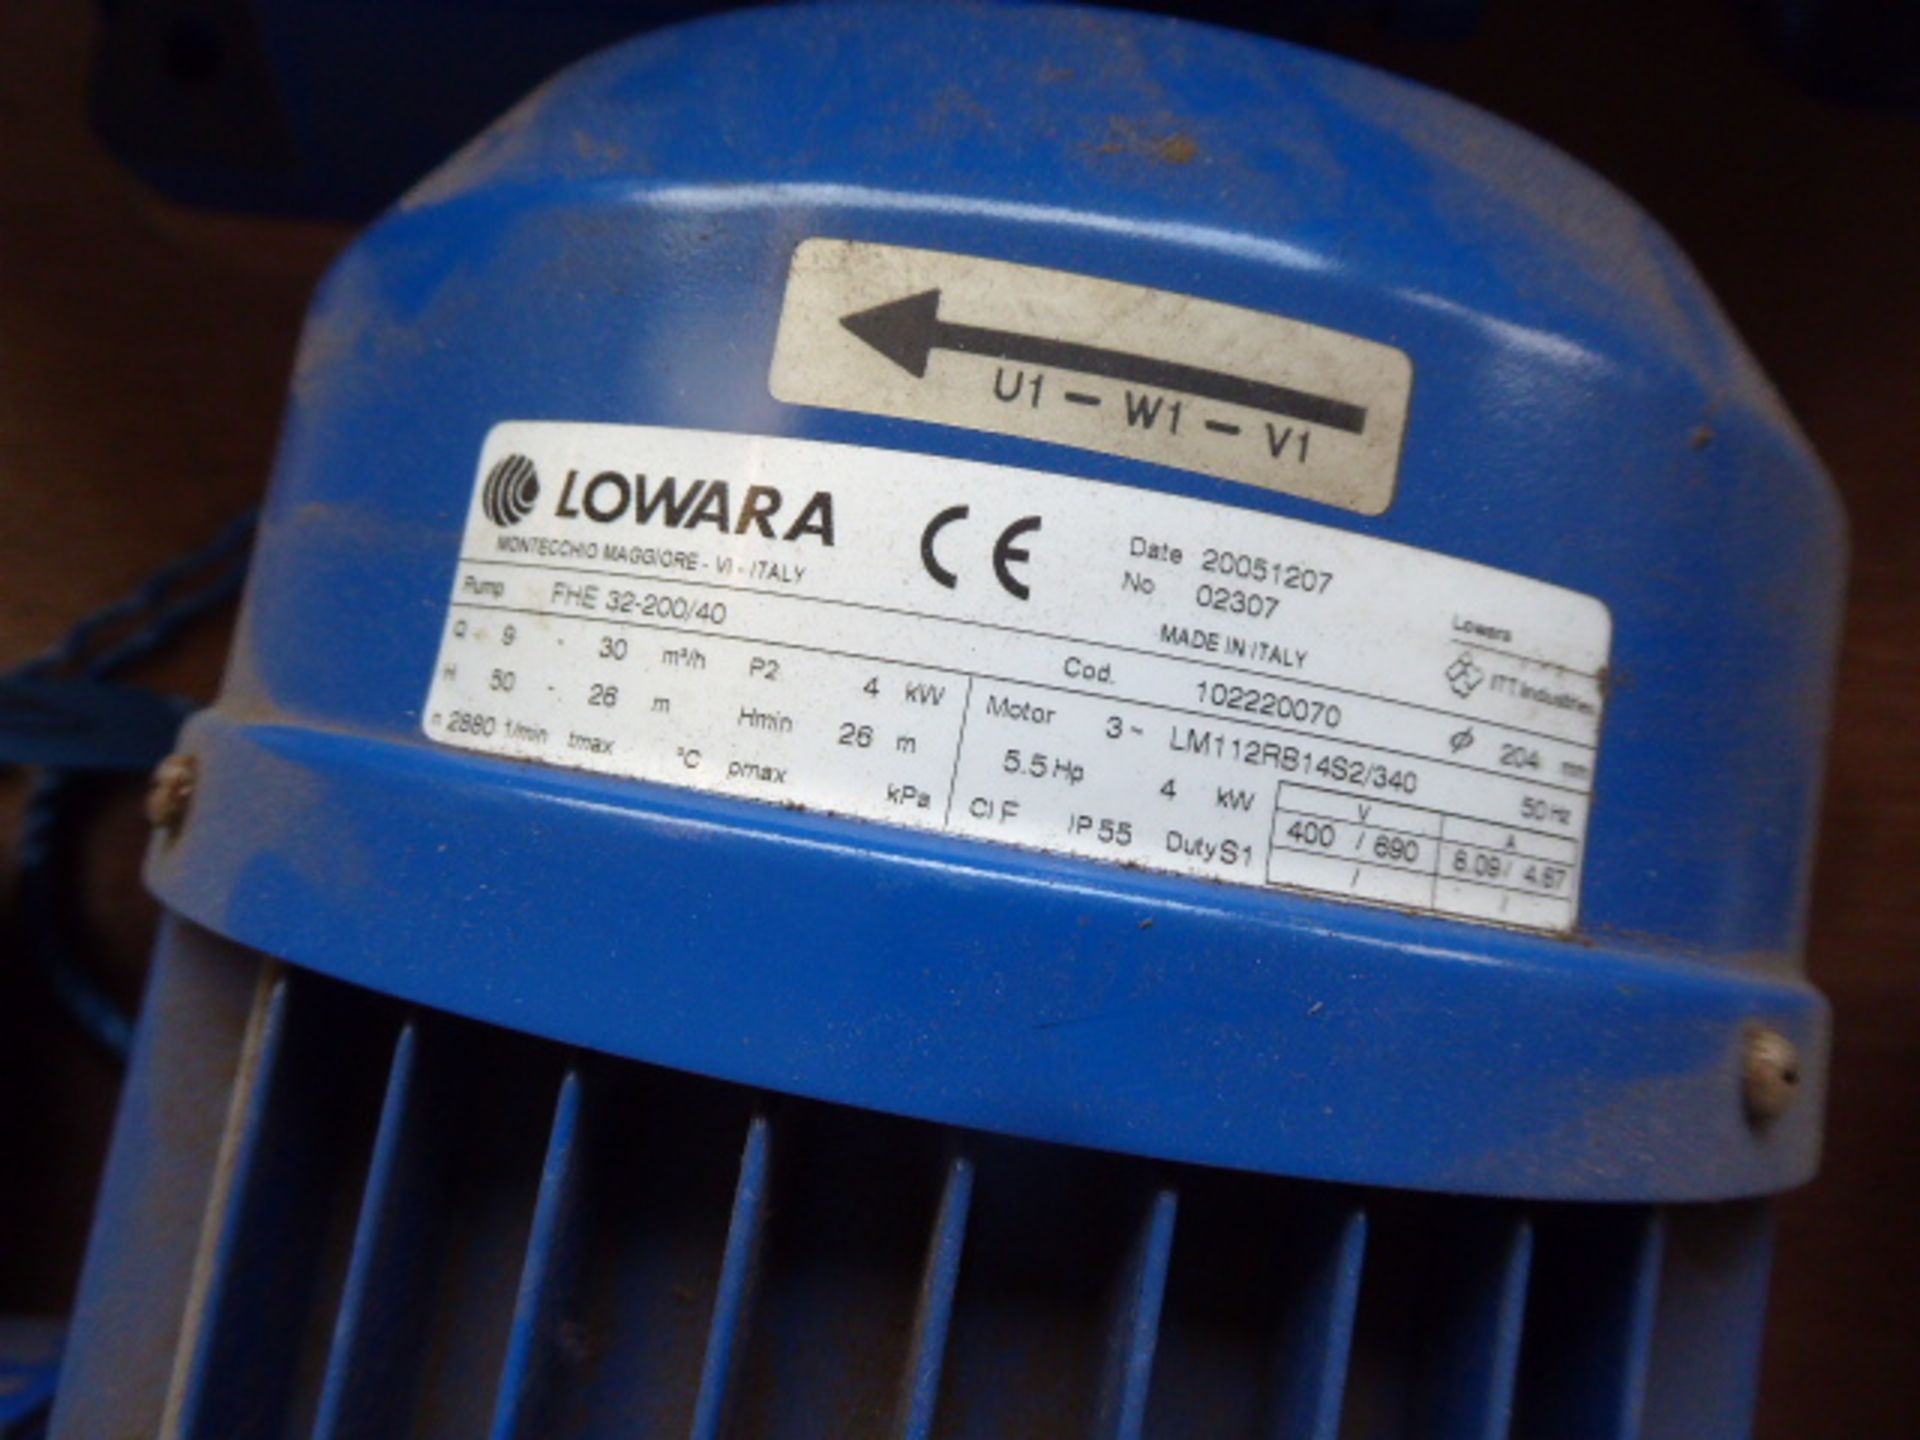 Lowara FHE 32-200/40 end section pump, 5.5kw - Image 2 of 3